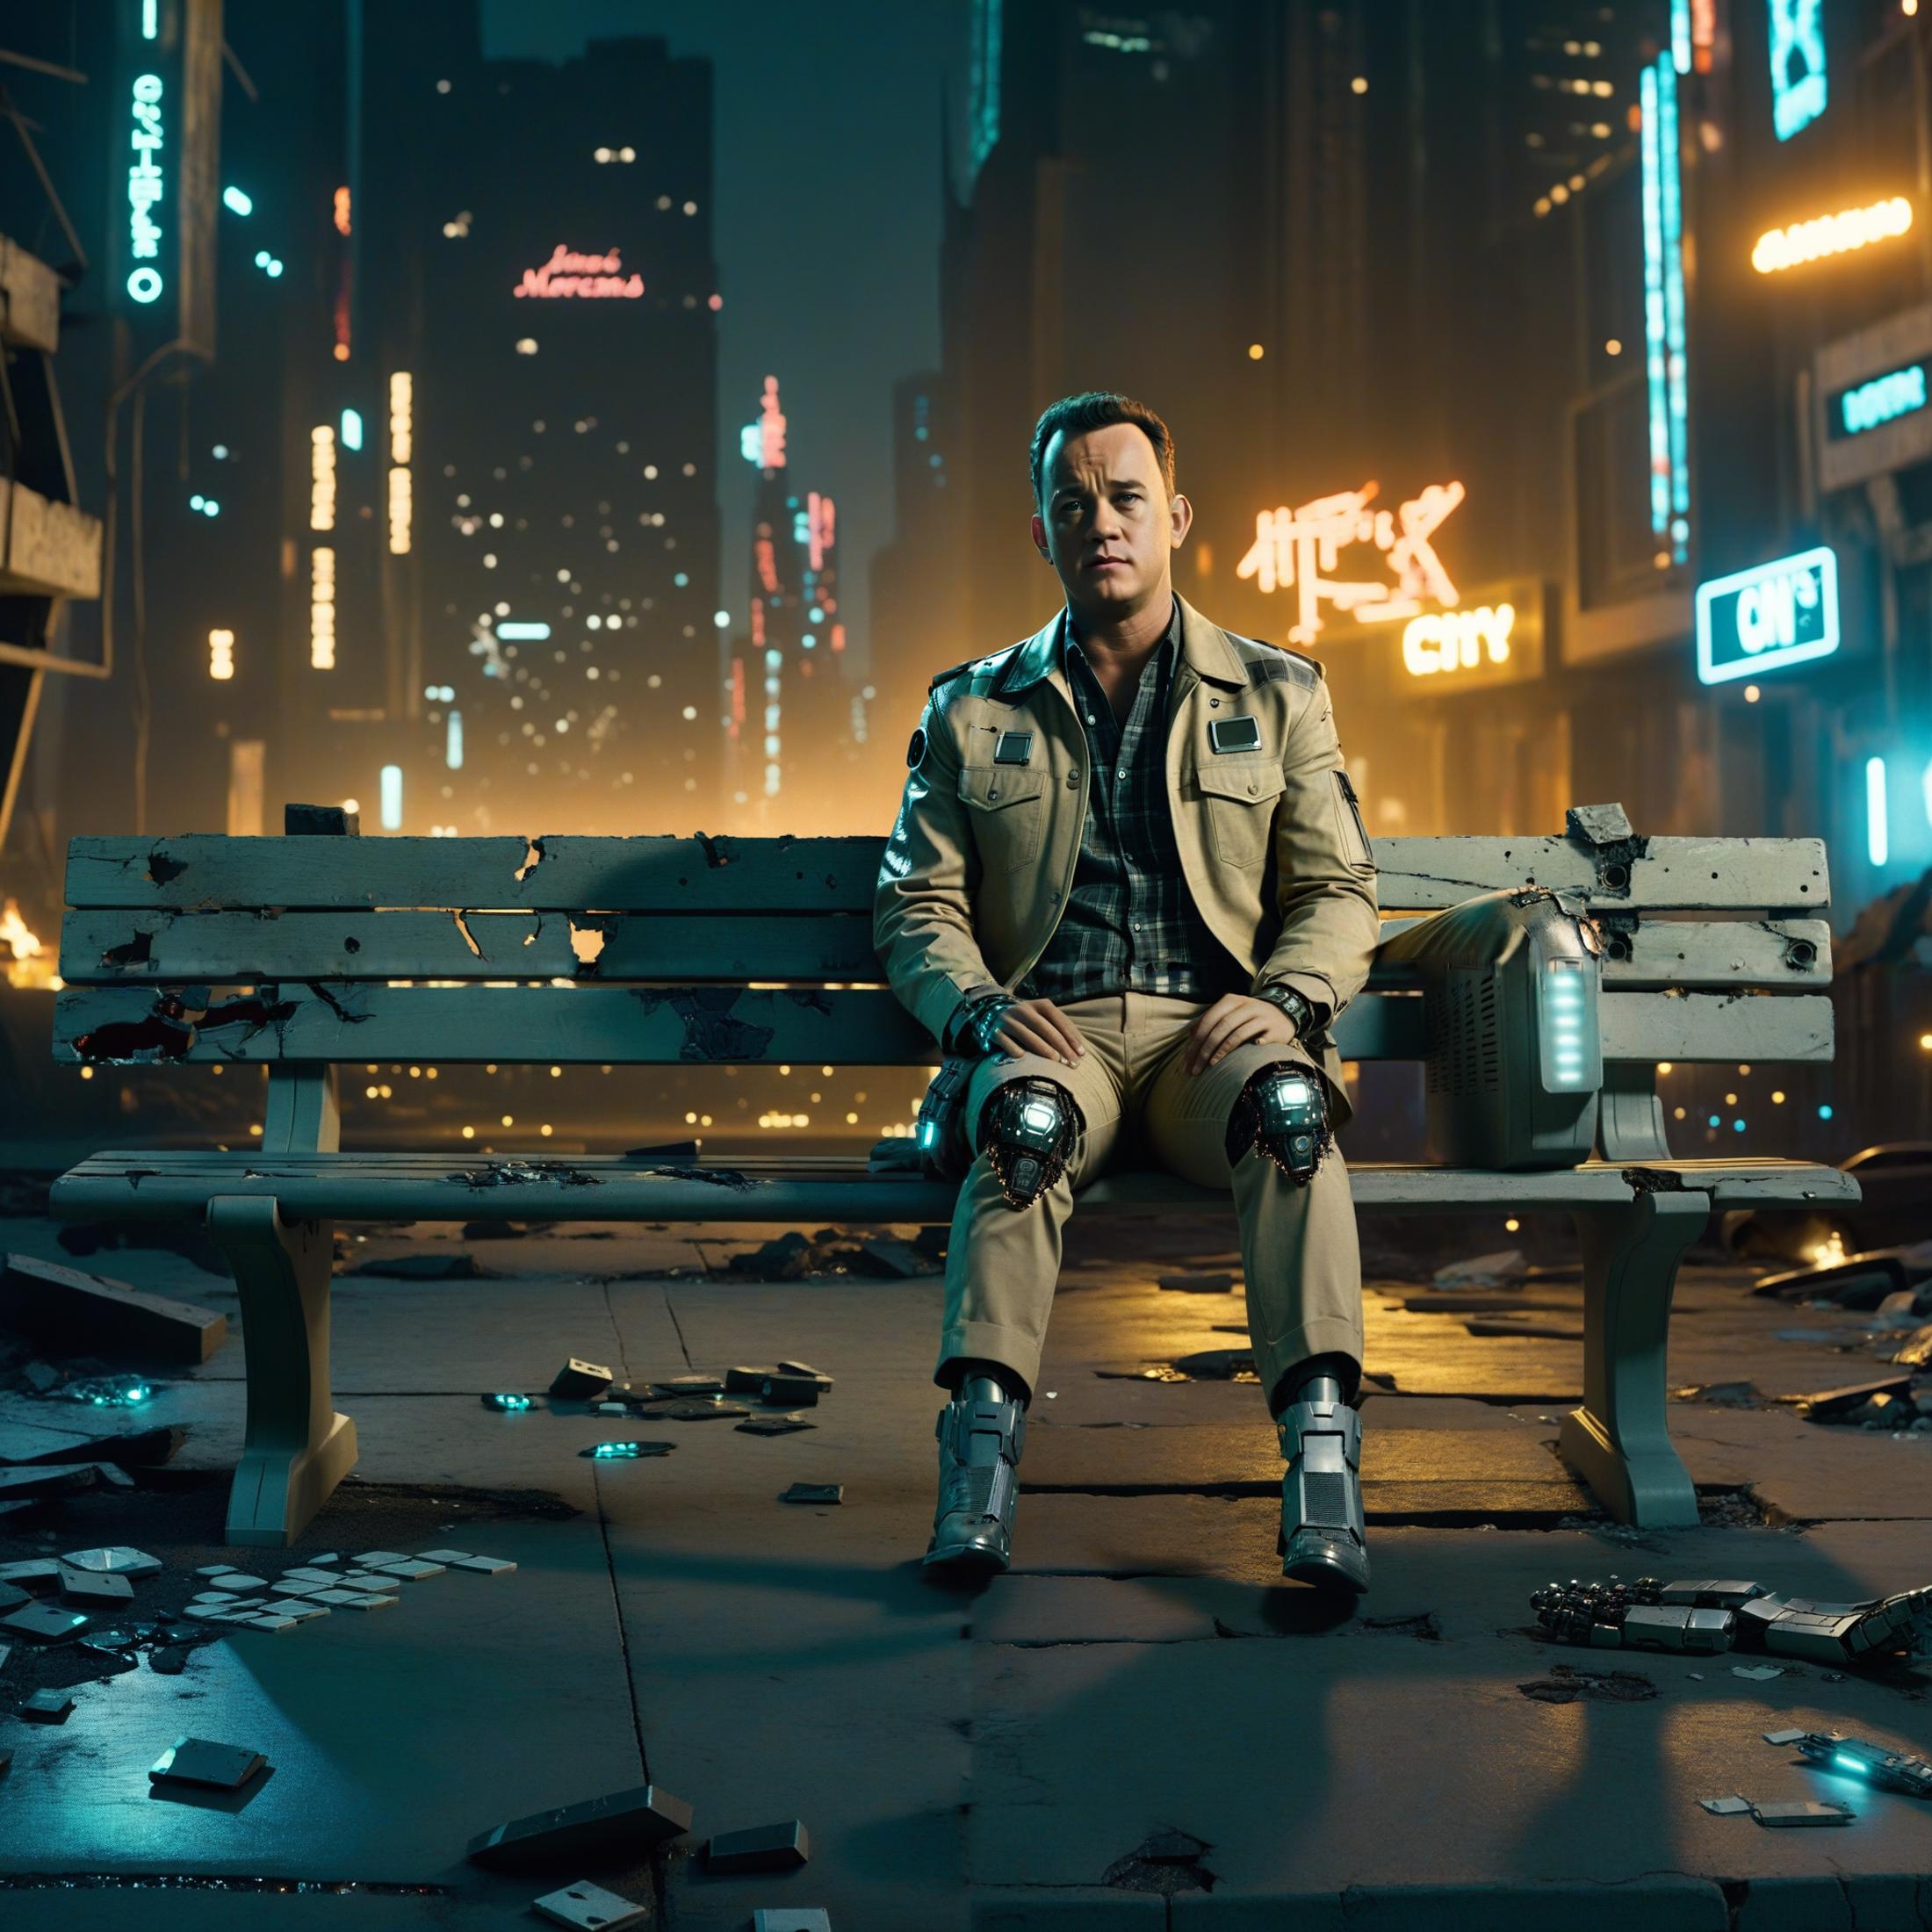 A man wearing a suit and mechanical legs sitting on a bench in a futuristic city.